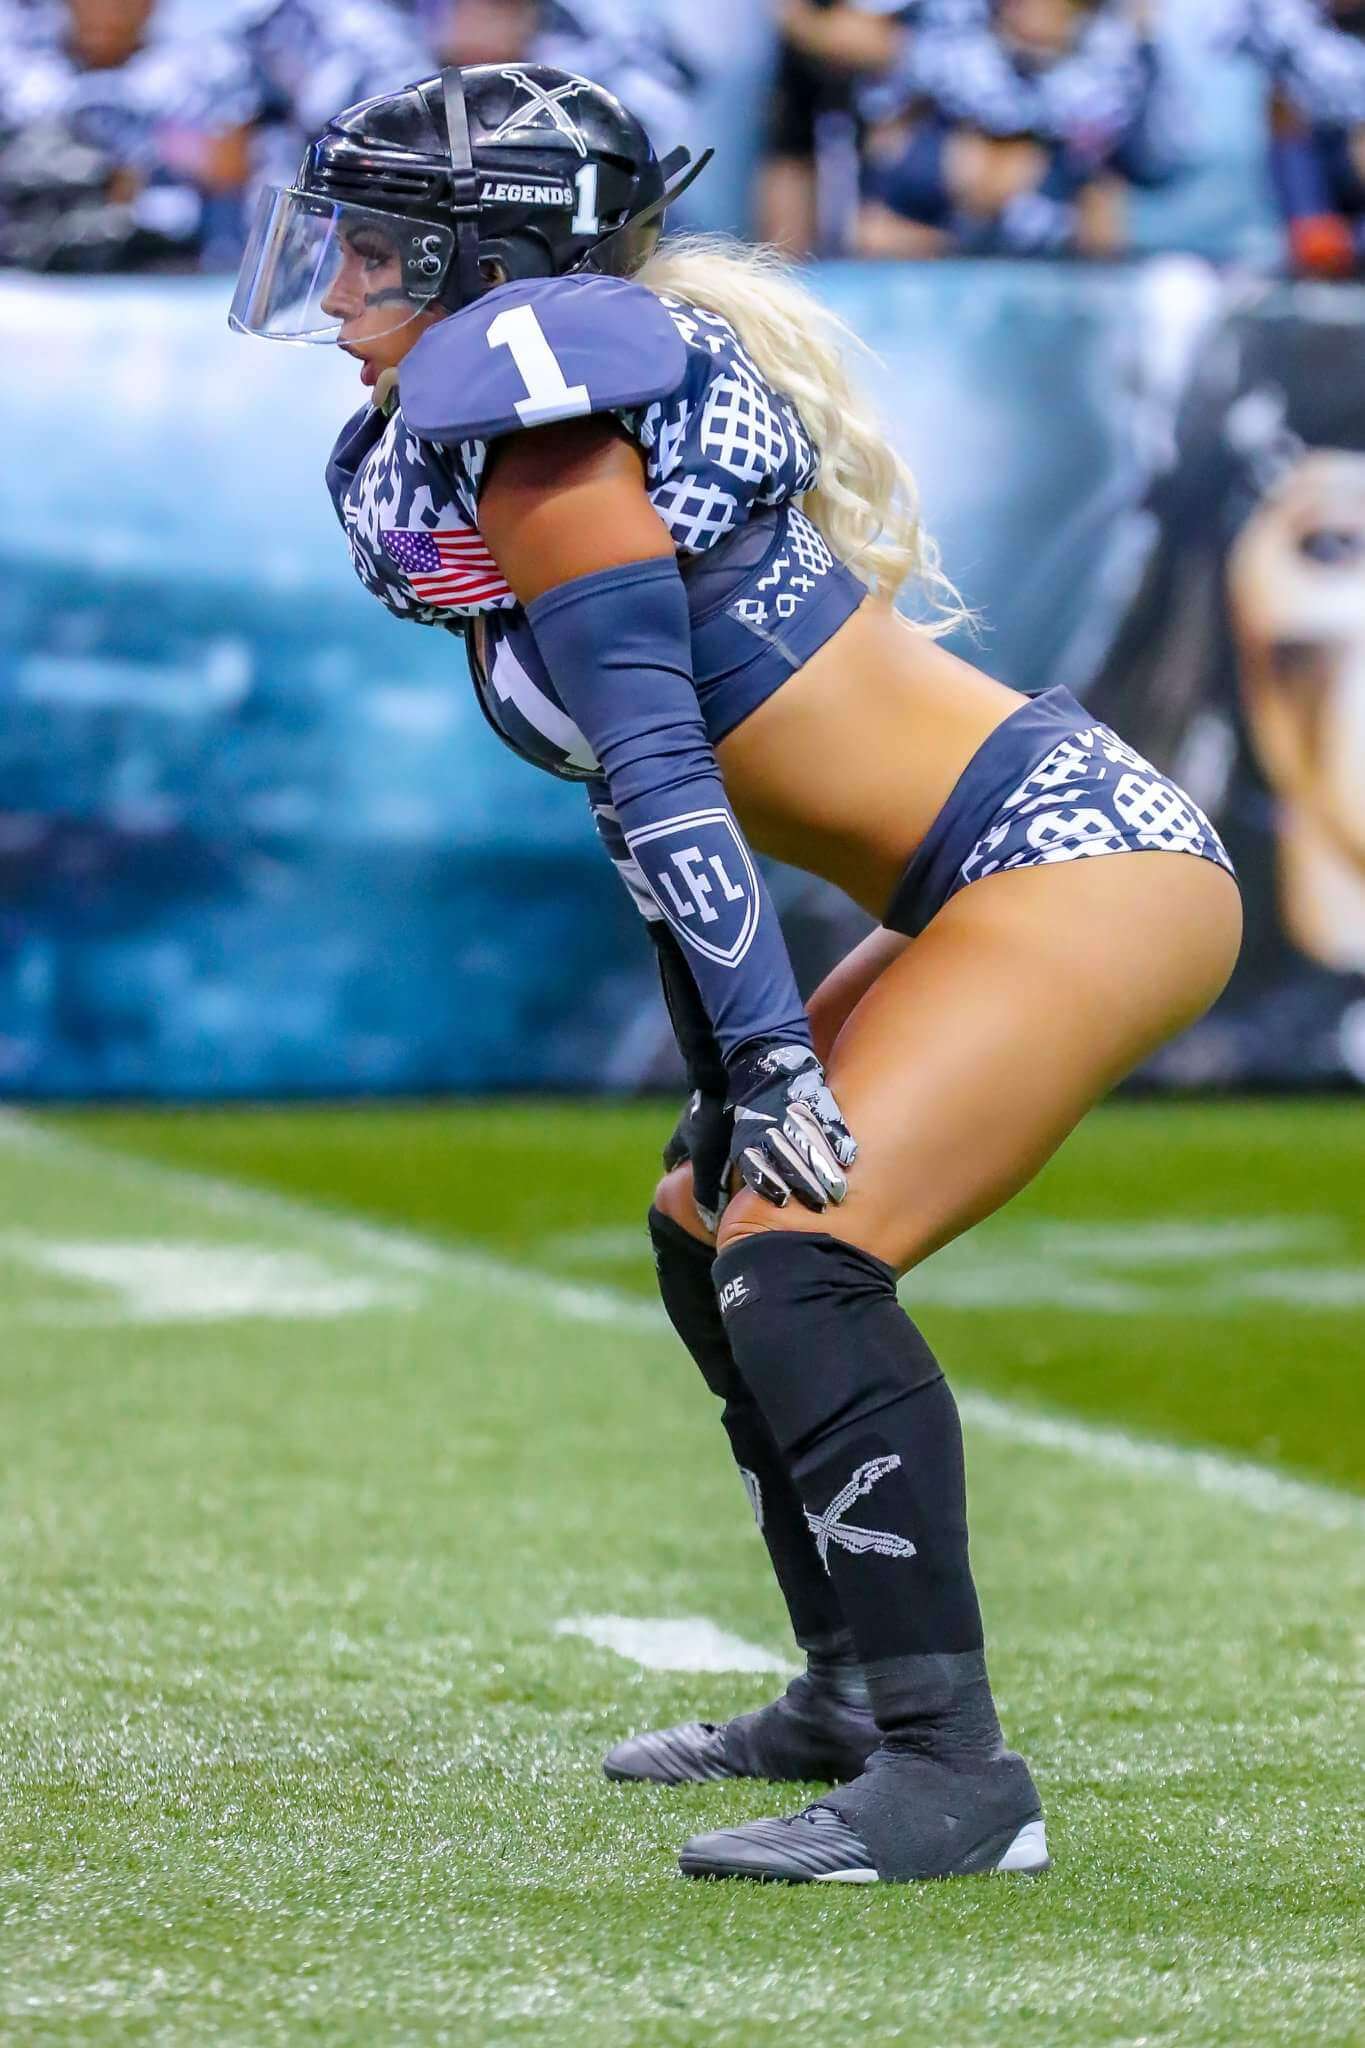 The Legends Football League Beautiful Women And Football, Need We Say Anymore! 100